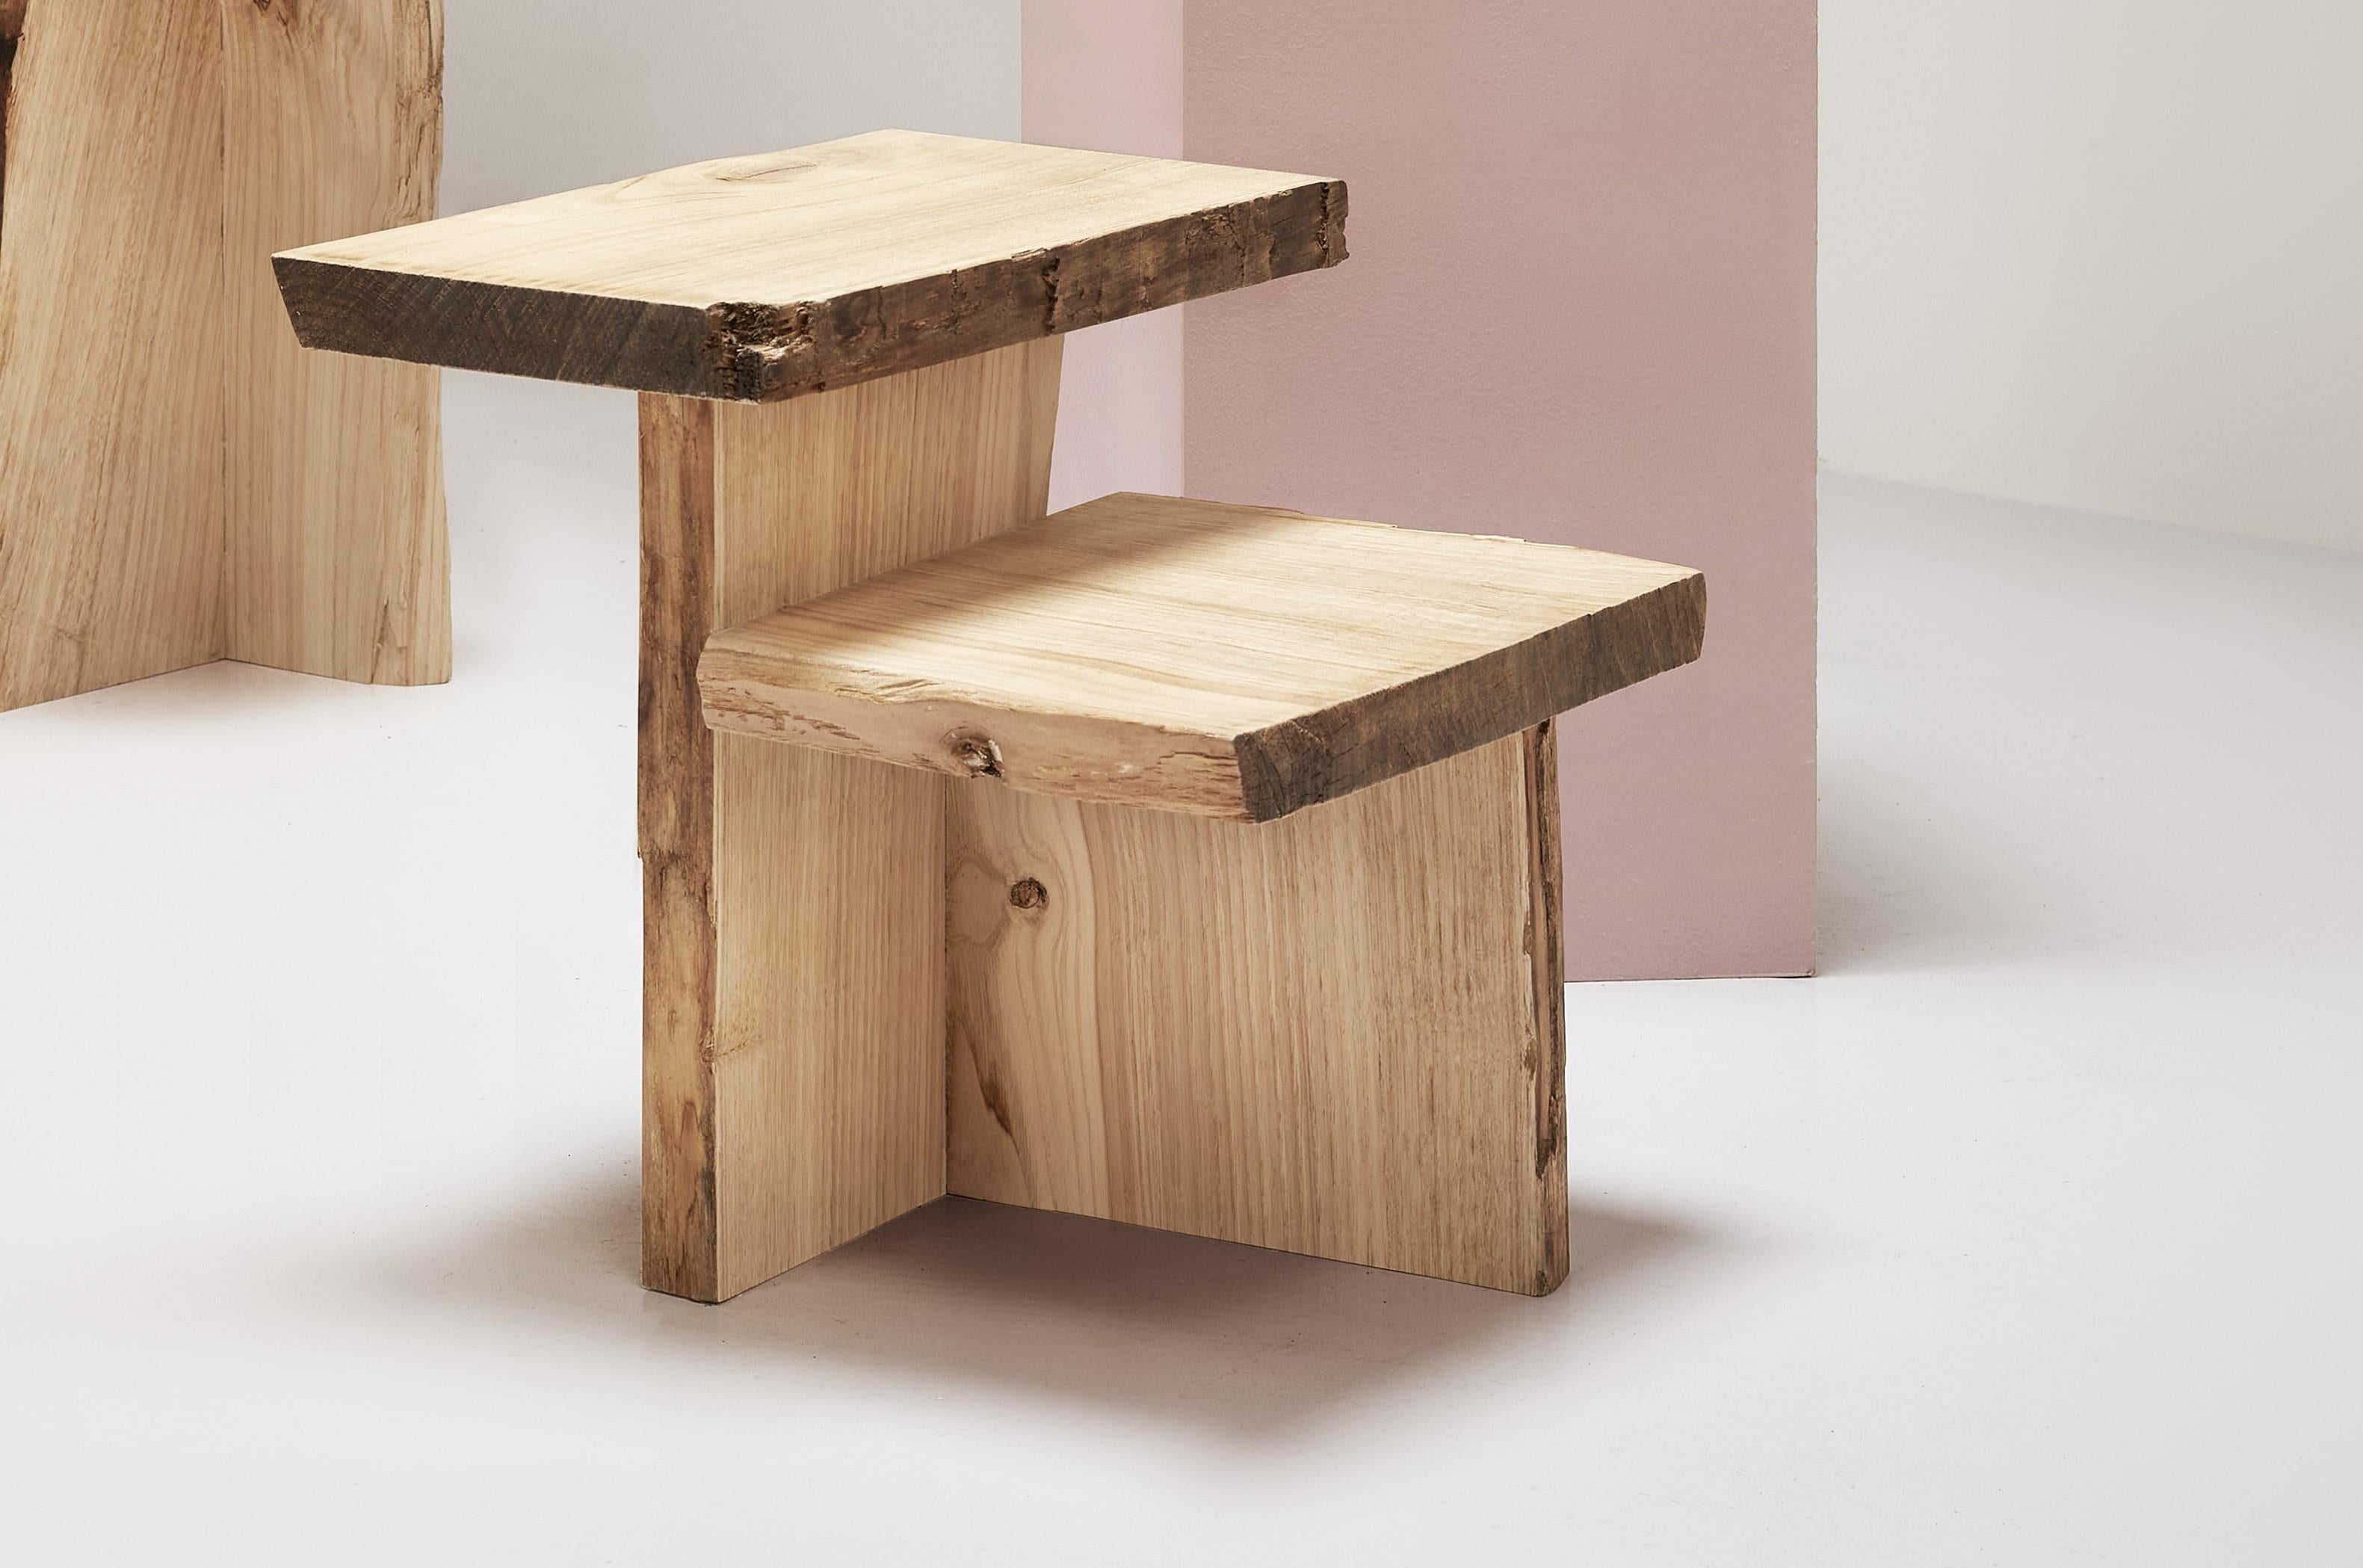 Ripped Wood Coffee Table by Willem Van Hooff
Handmade
Dimensions: W 50 x H 46 cm (Dimensions may vary as pieces are hand-made and might present slight variations in sizes)
Materials: Wood.


Willem van Hooff is a designer based in Eindhoven.
He is a